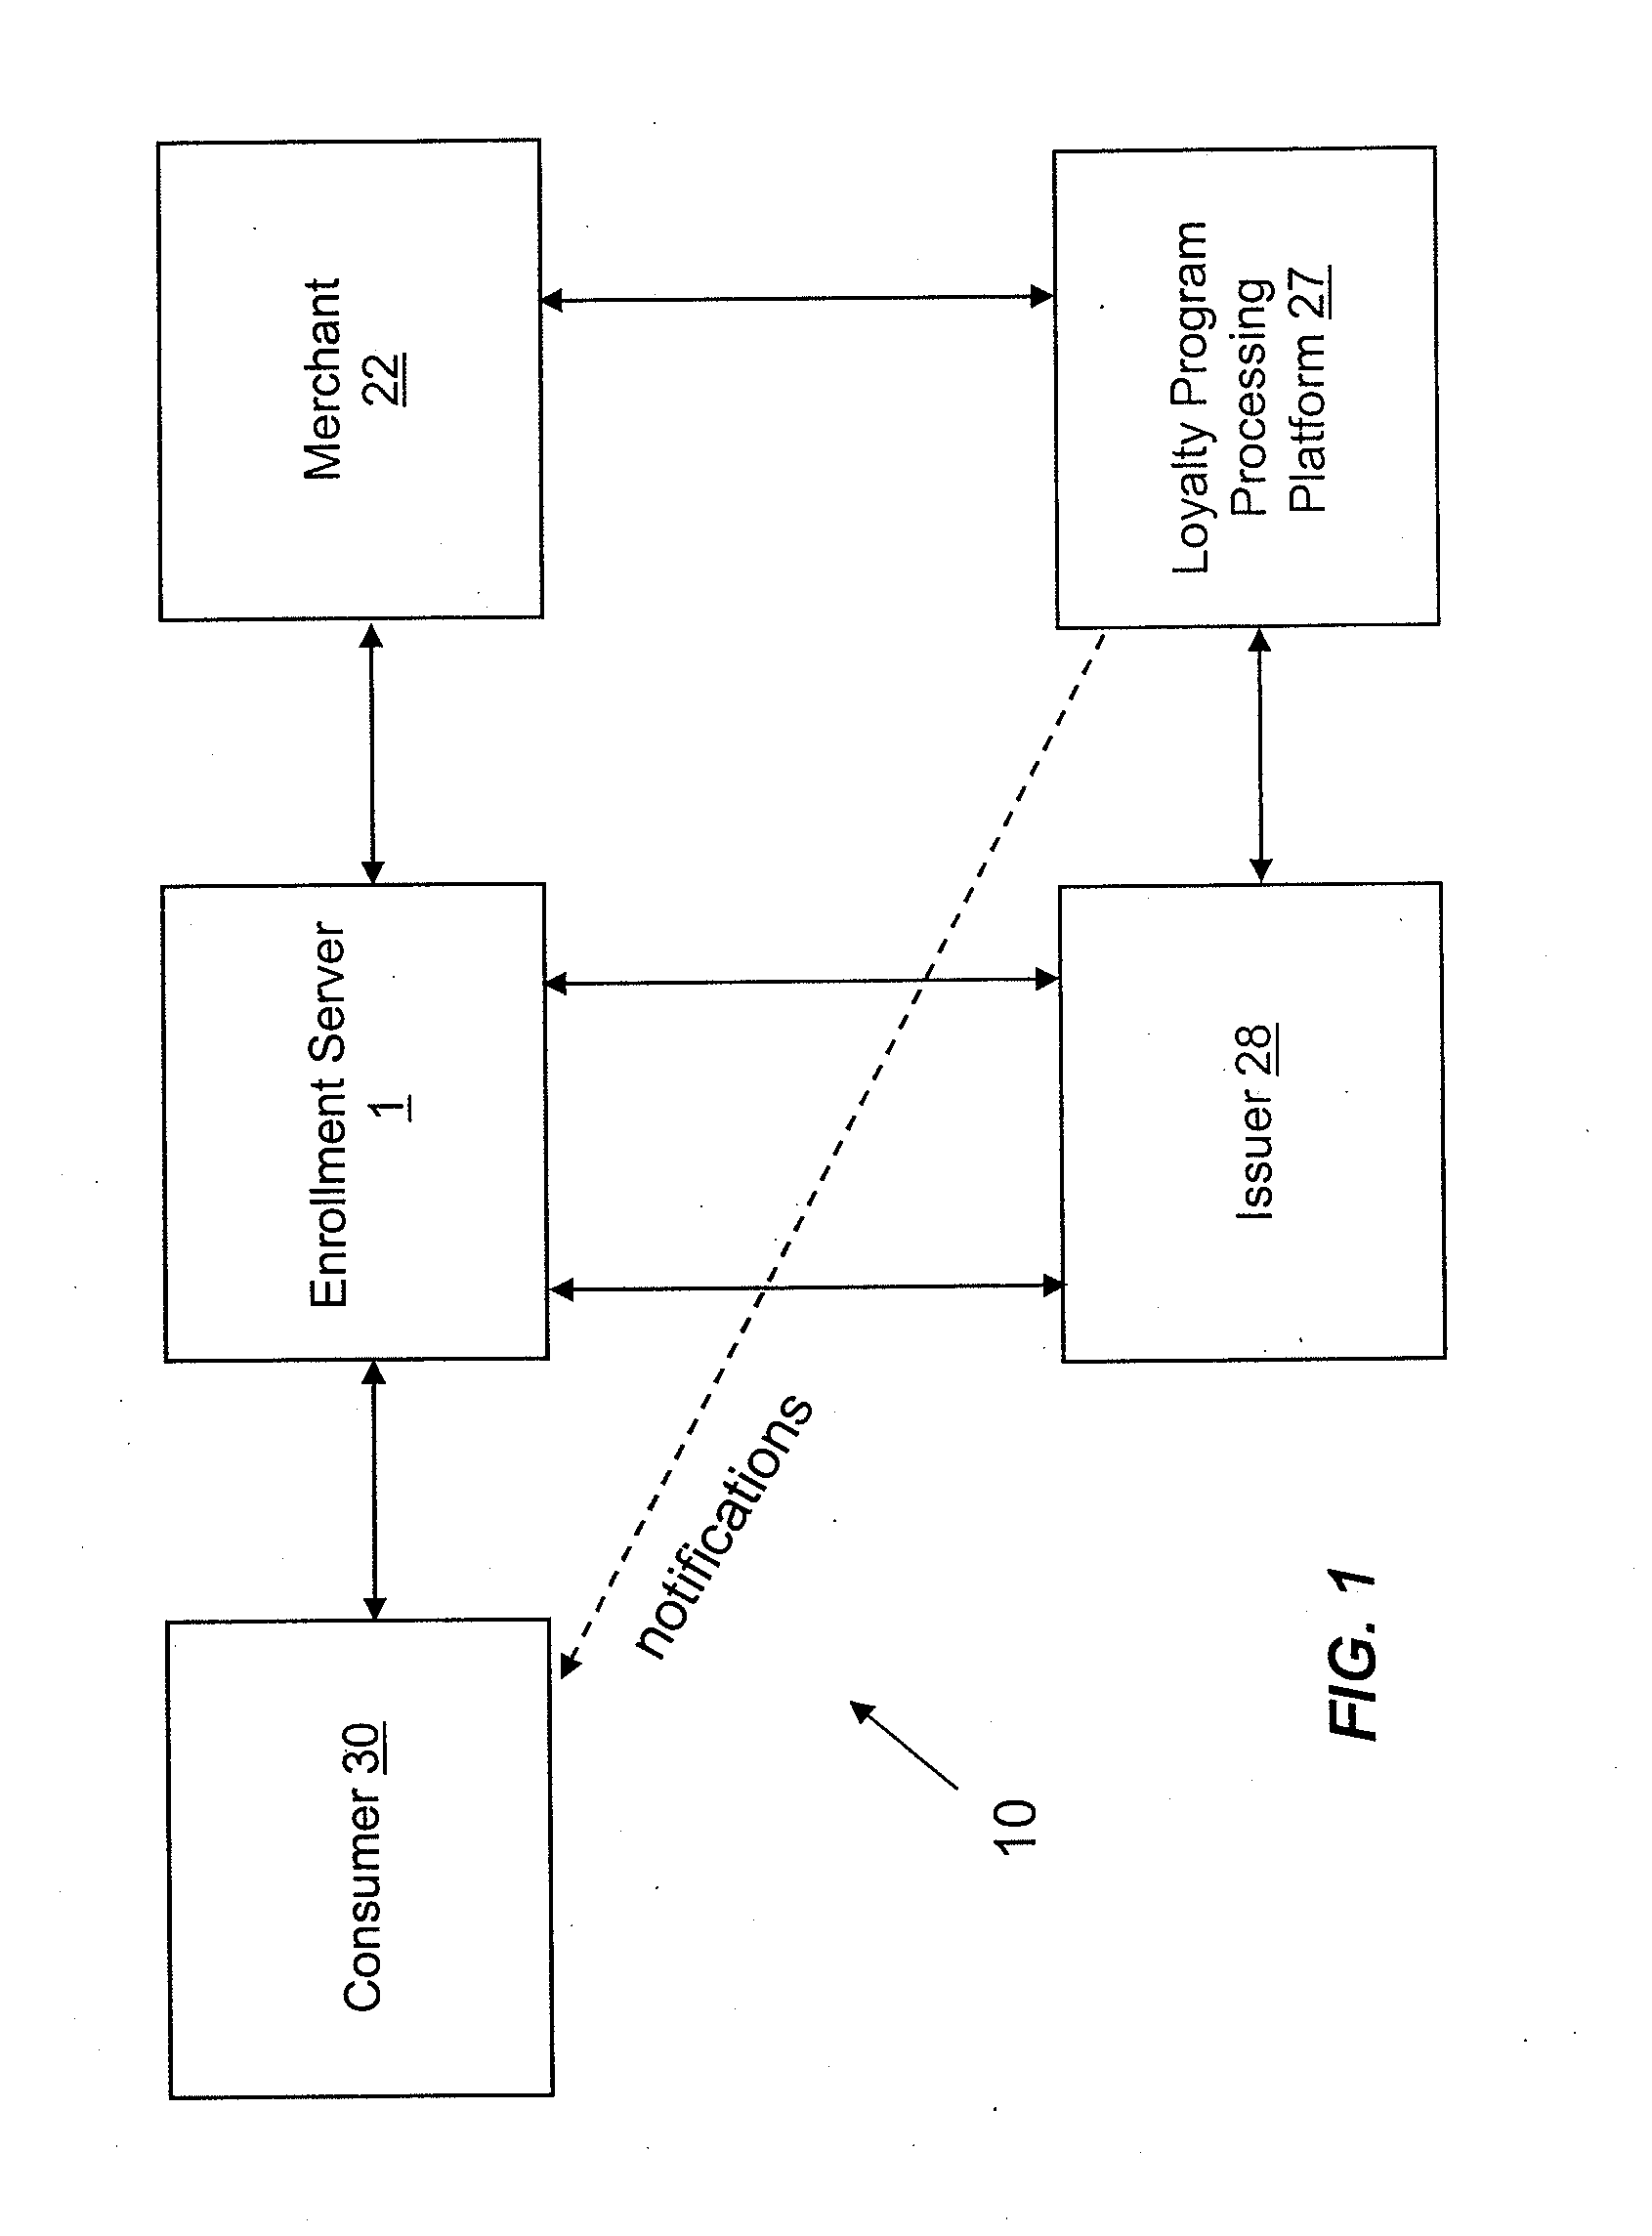 System and method for benefit notification